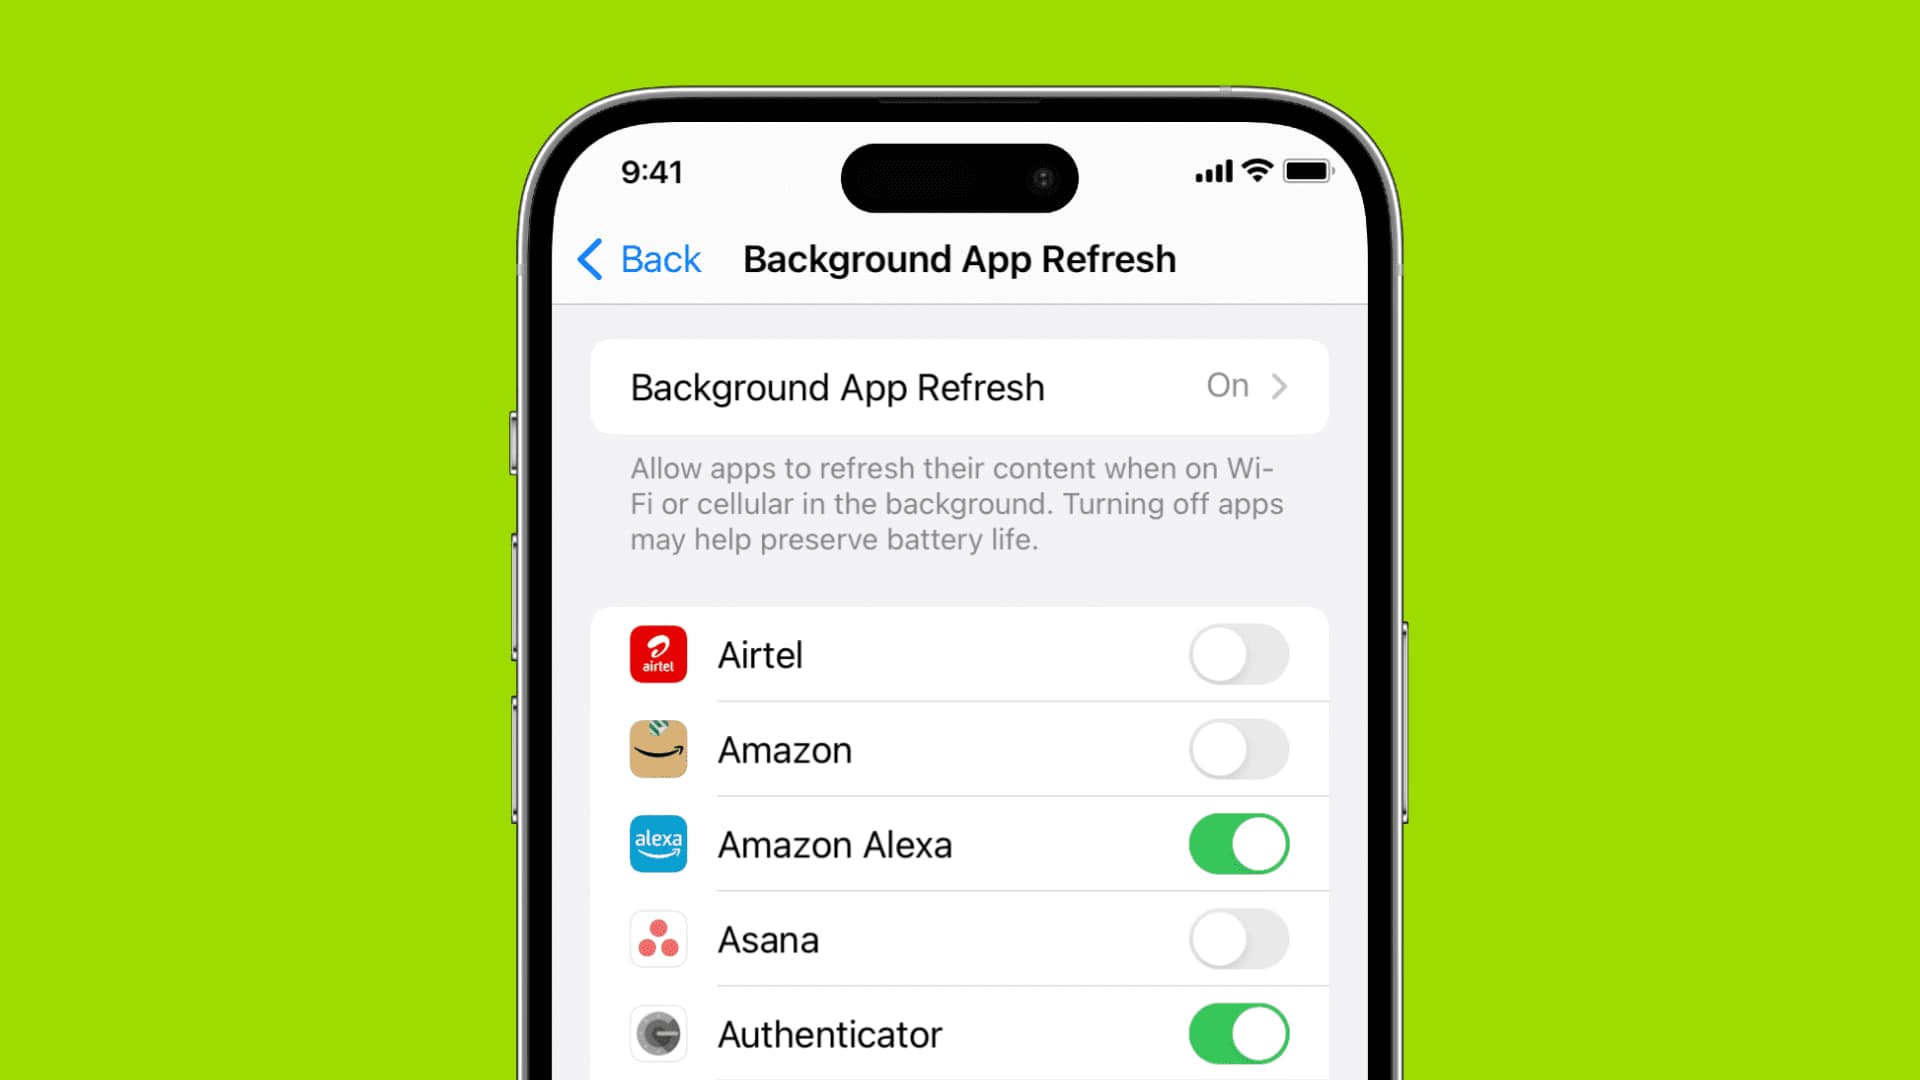 Background App Refresh in iPhone settings